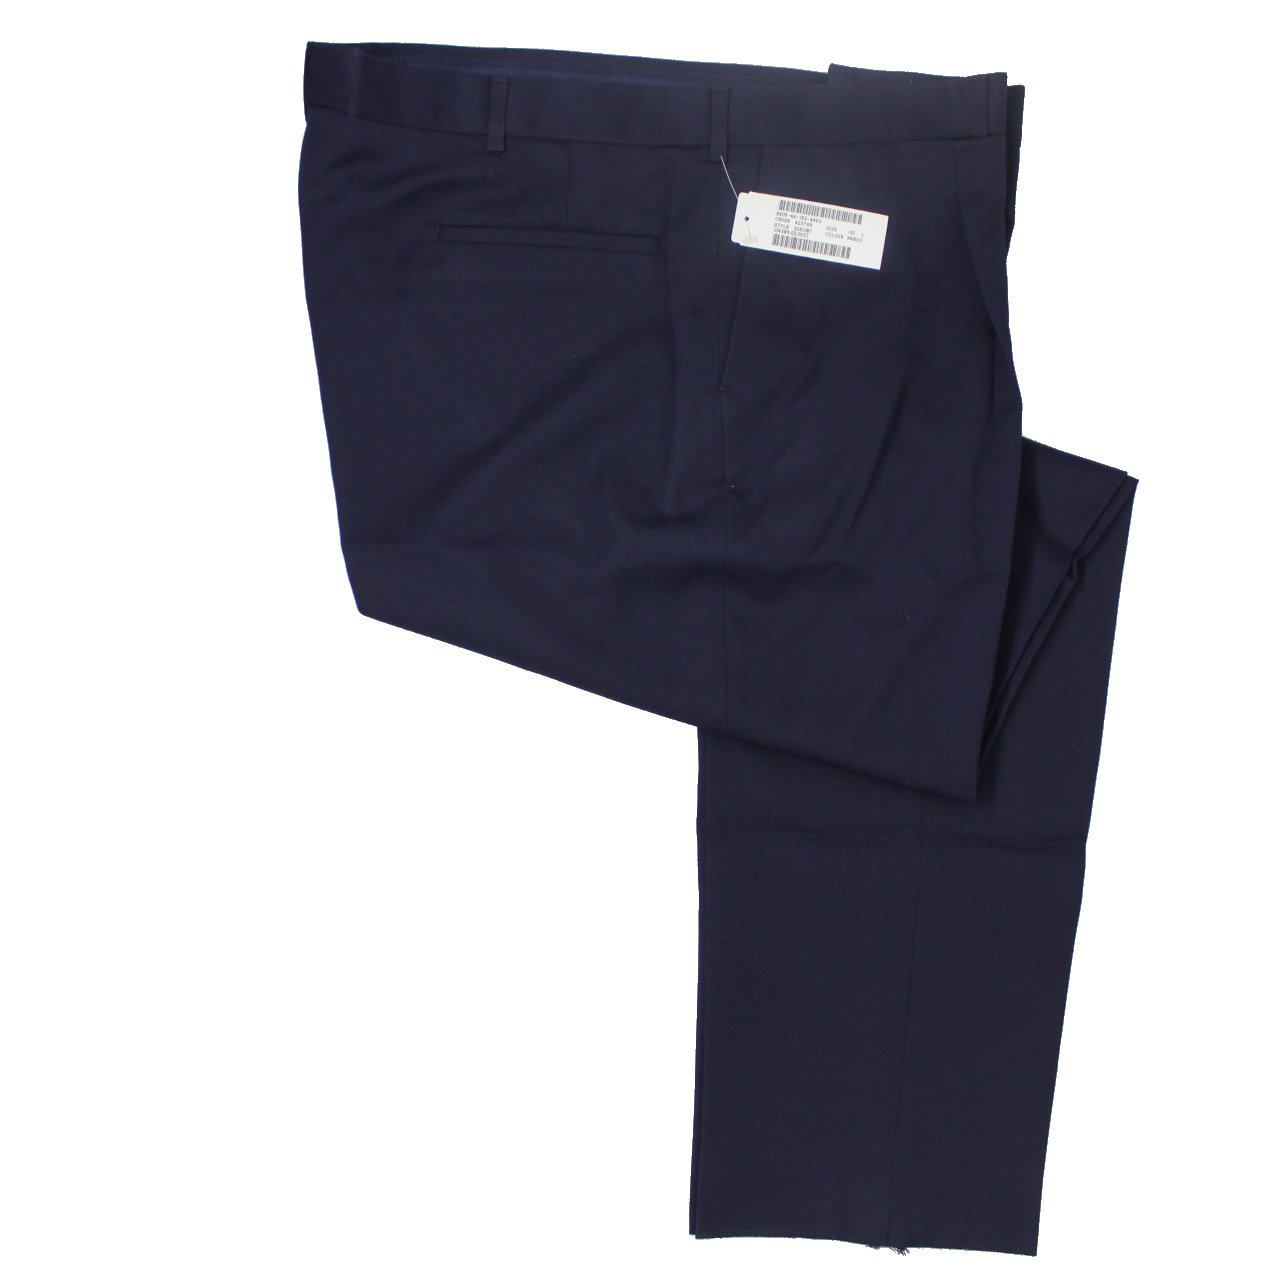 Mens Tapered Wool Trousers  Shop Online  MYER